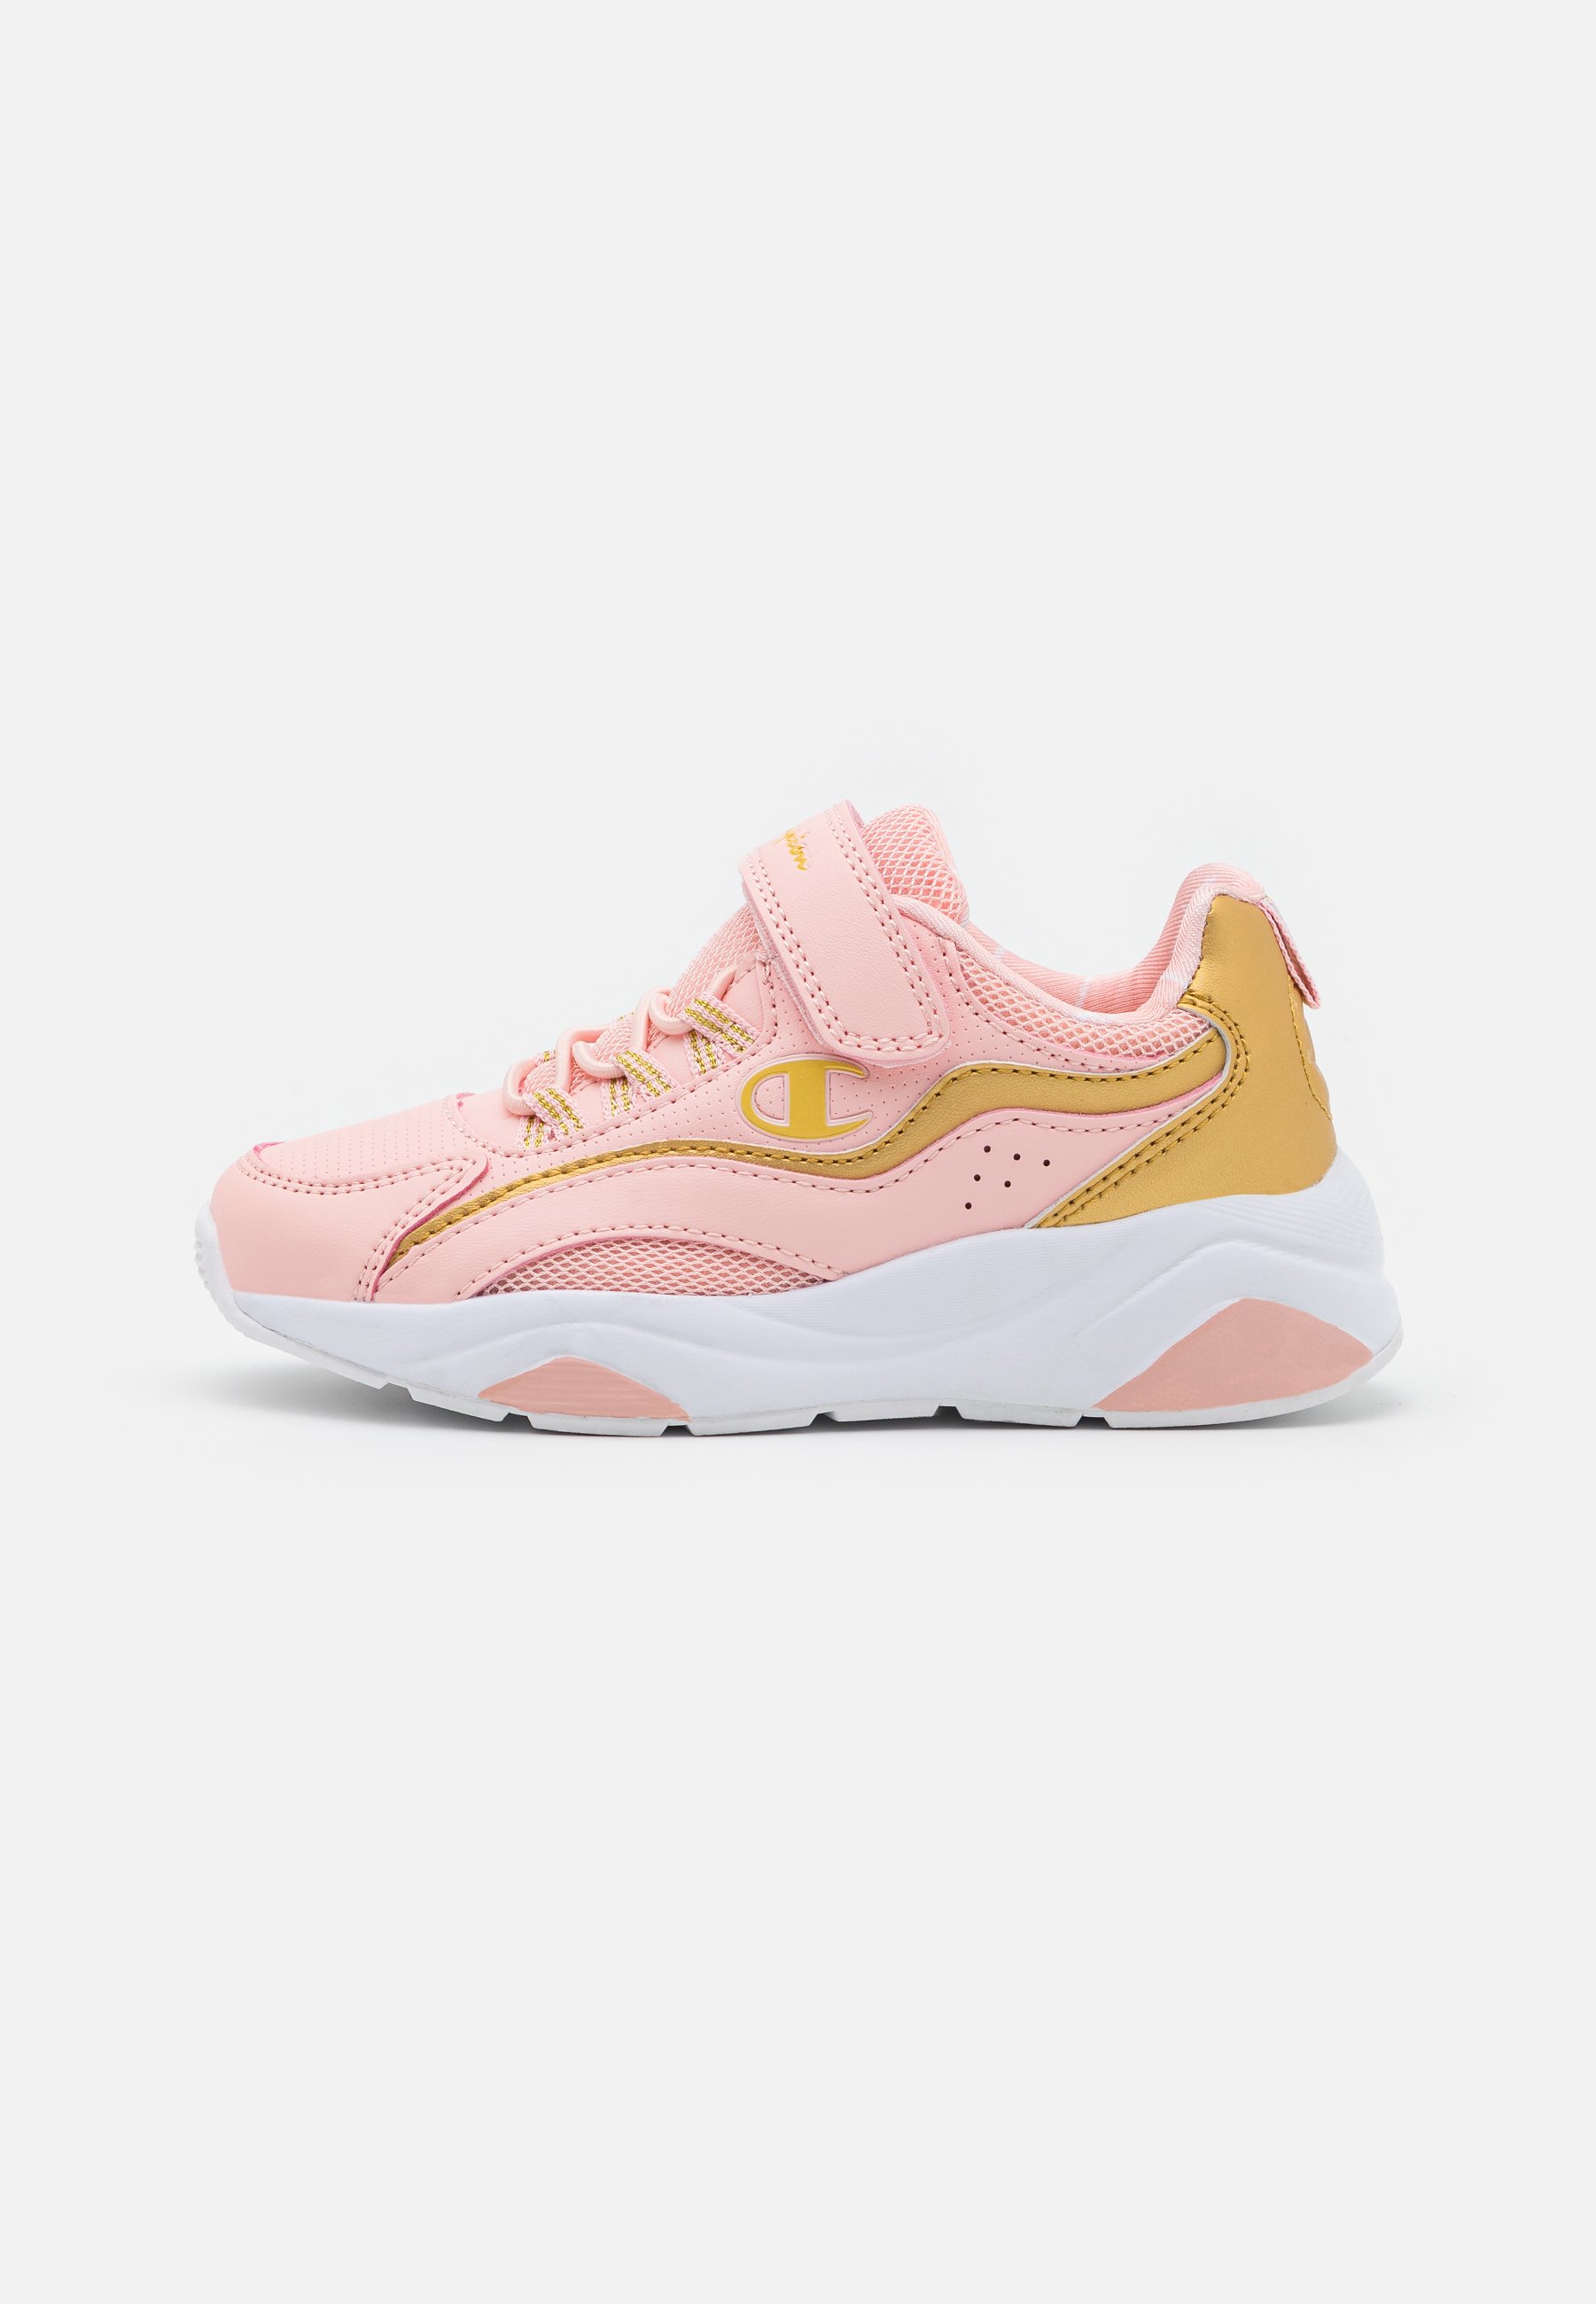 Champion LOW CUT SHOE RECESS - Trainings-/Fitnessschuh - pink/gold/rosa